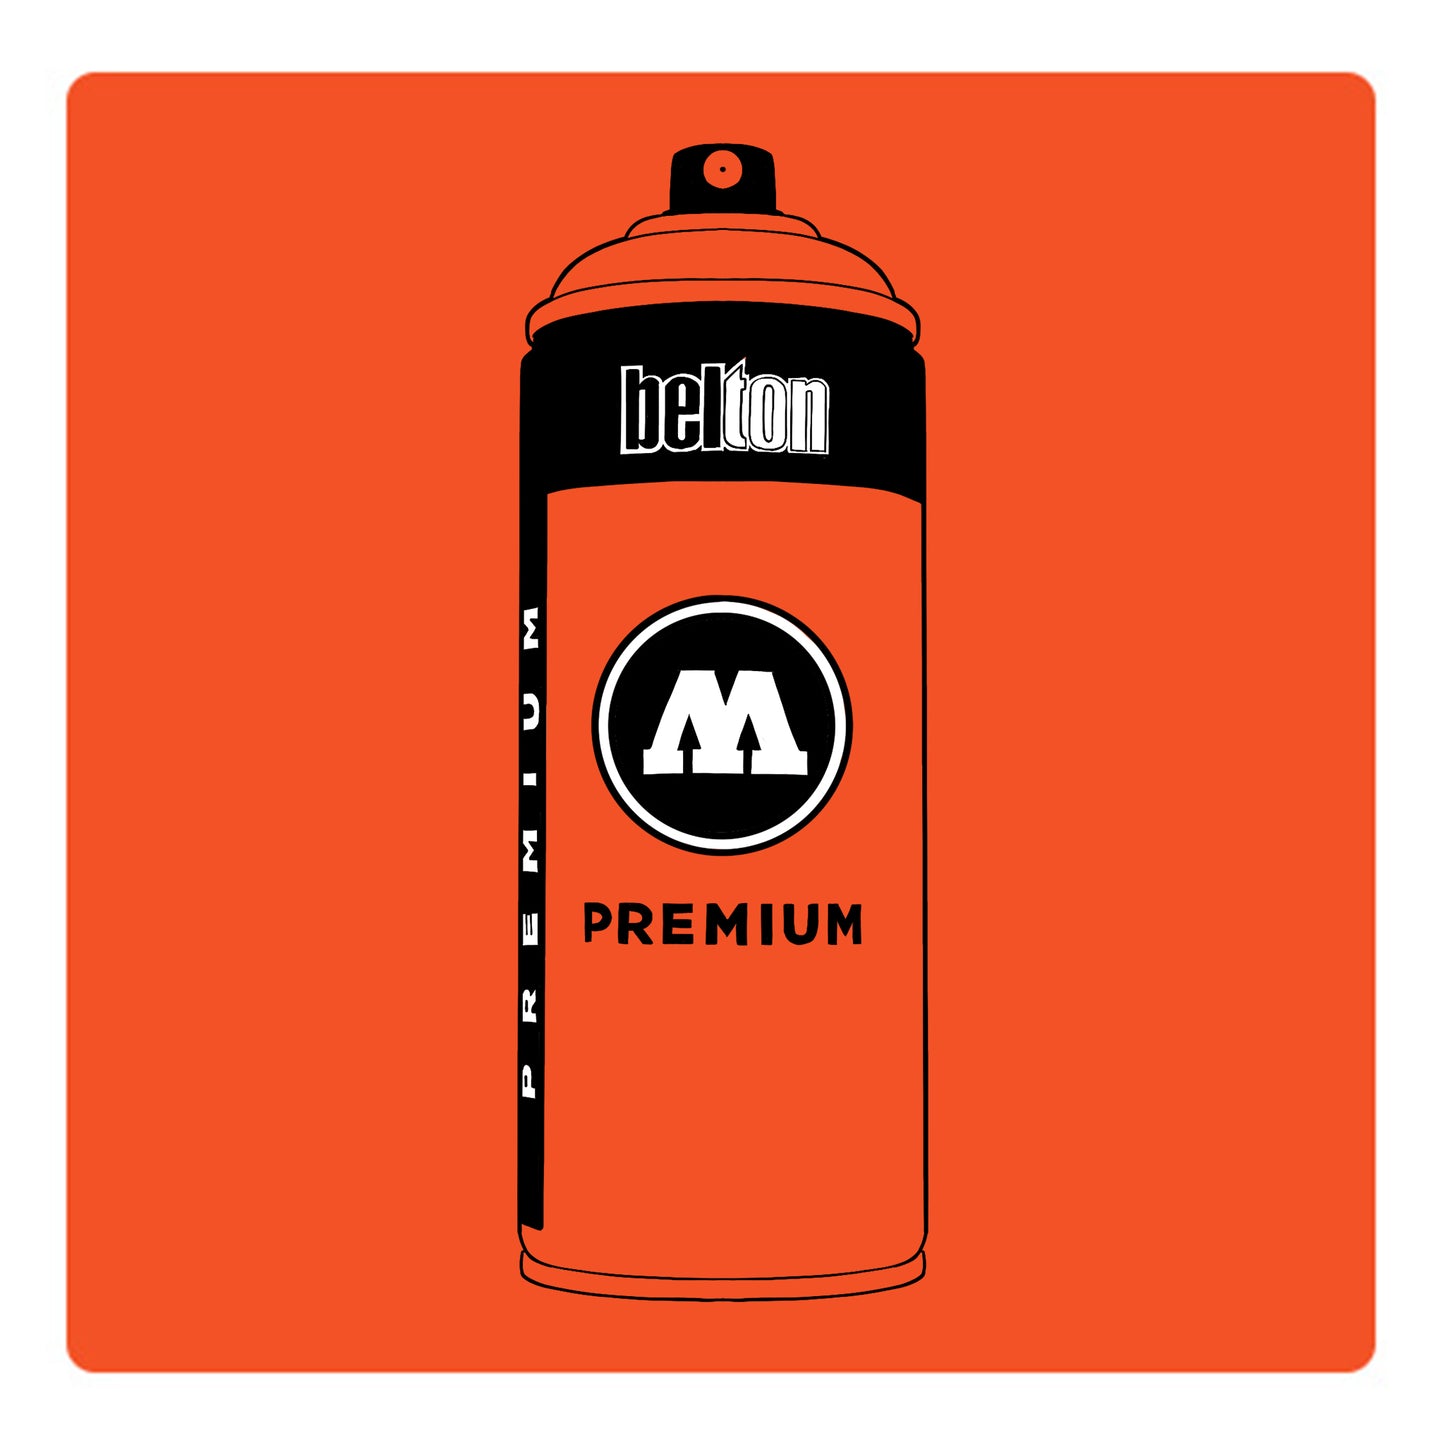 A black outline drawing of a bright orange spray paint can with the words "belton","premium" and the letter"M" written on the face in black and white font. The background is a color swatch of the same bright orange with a white border.